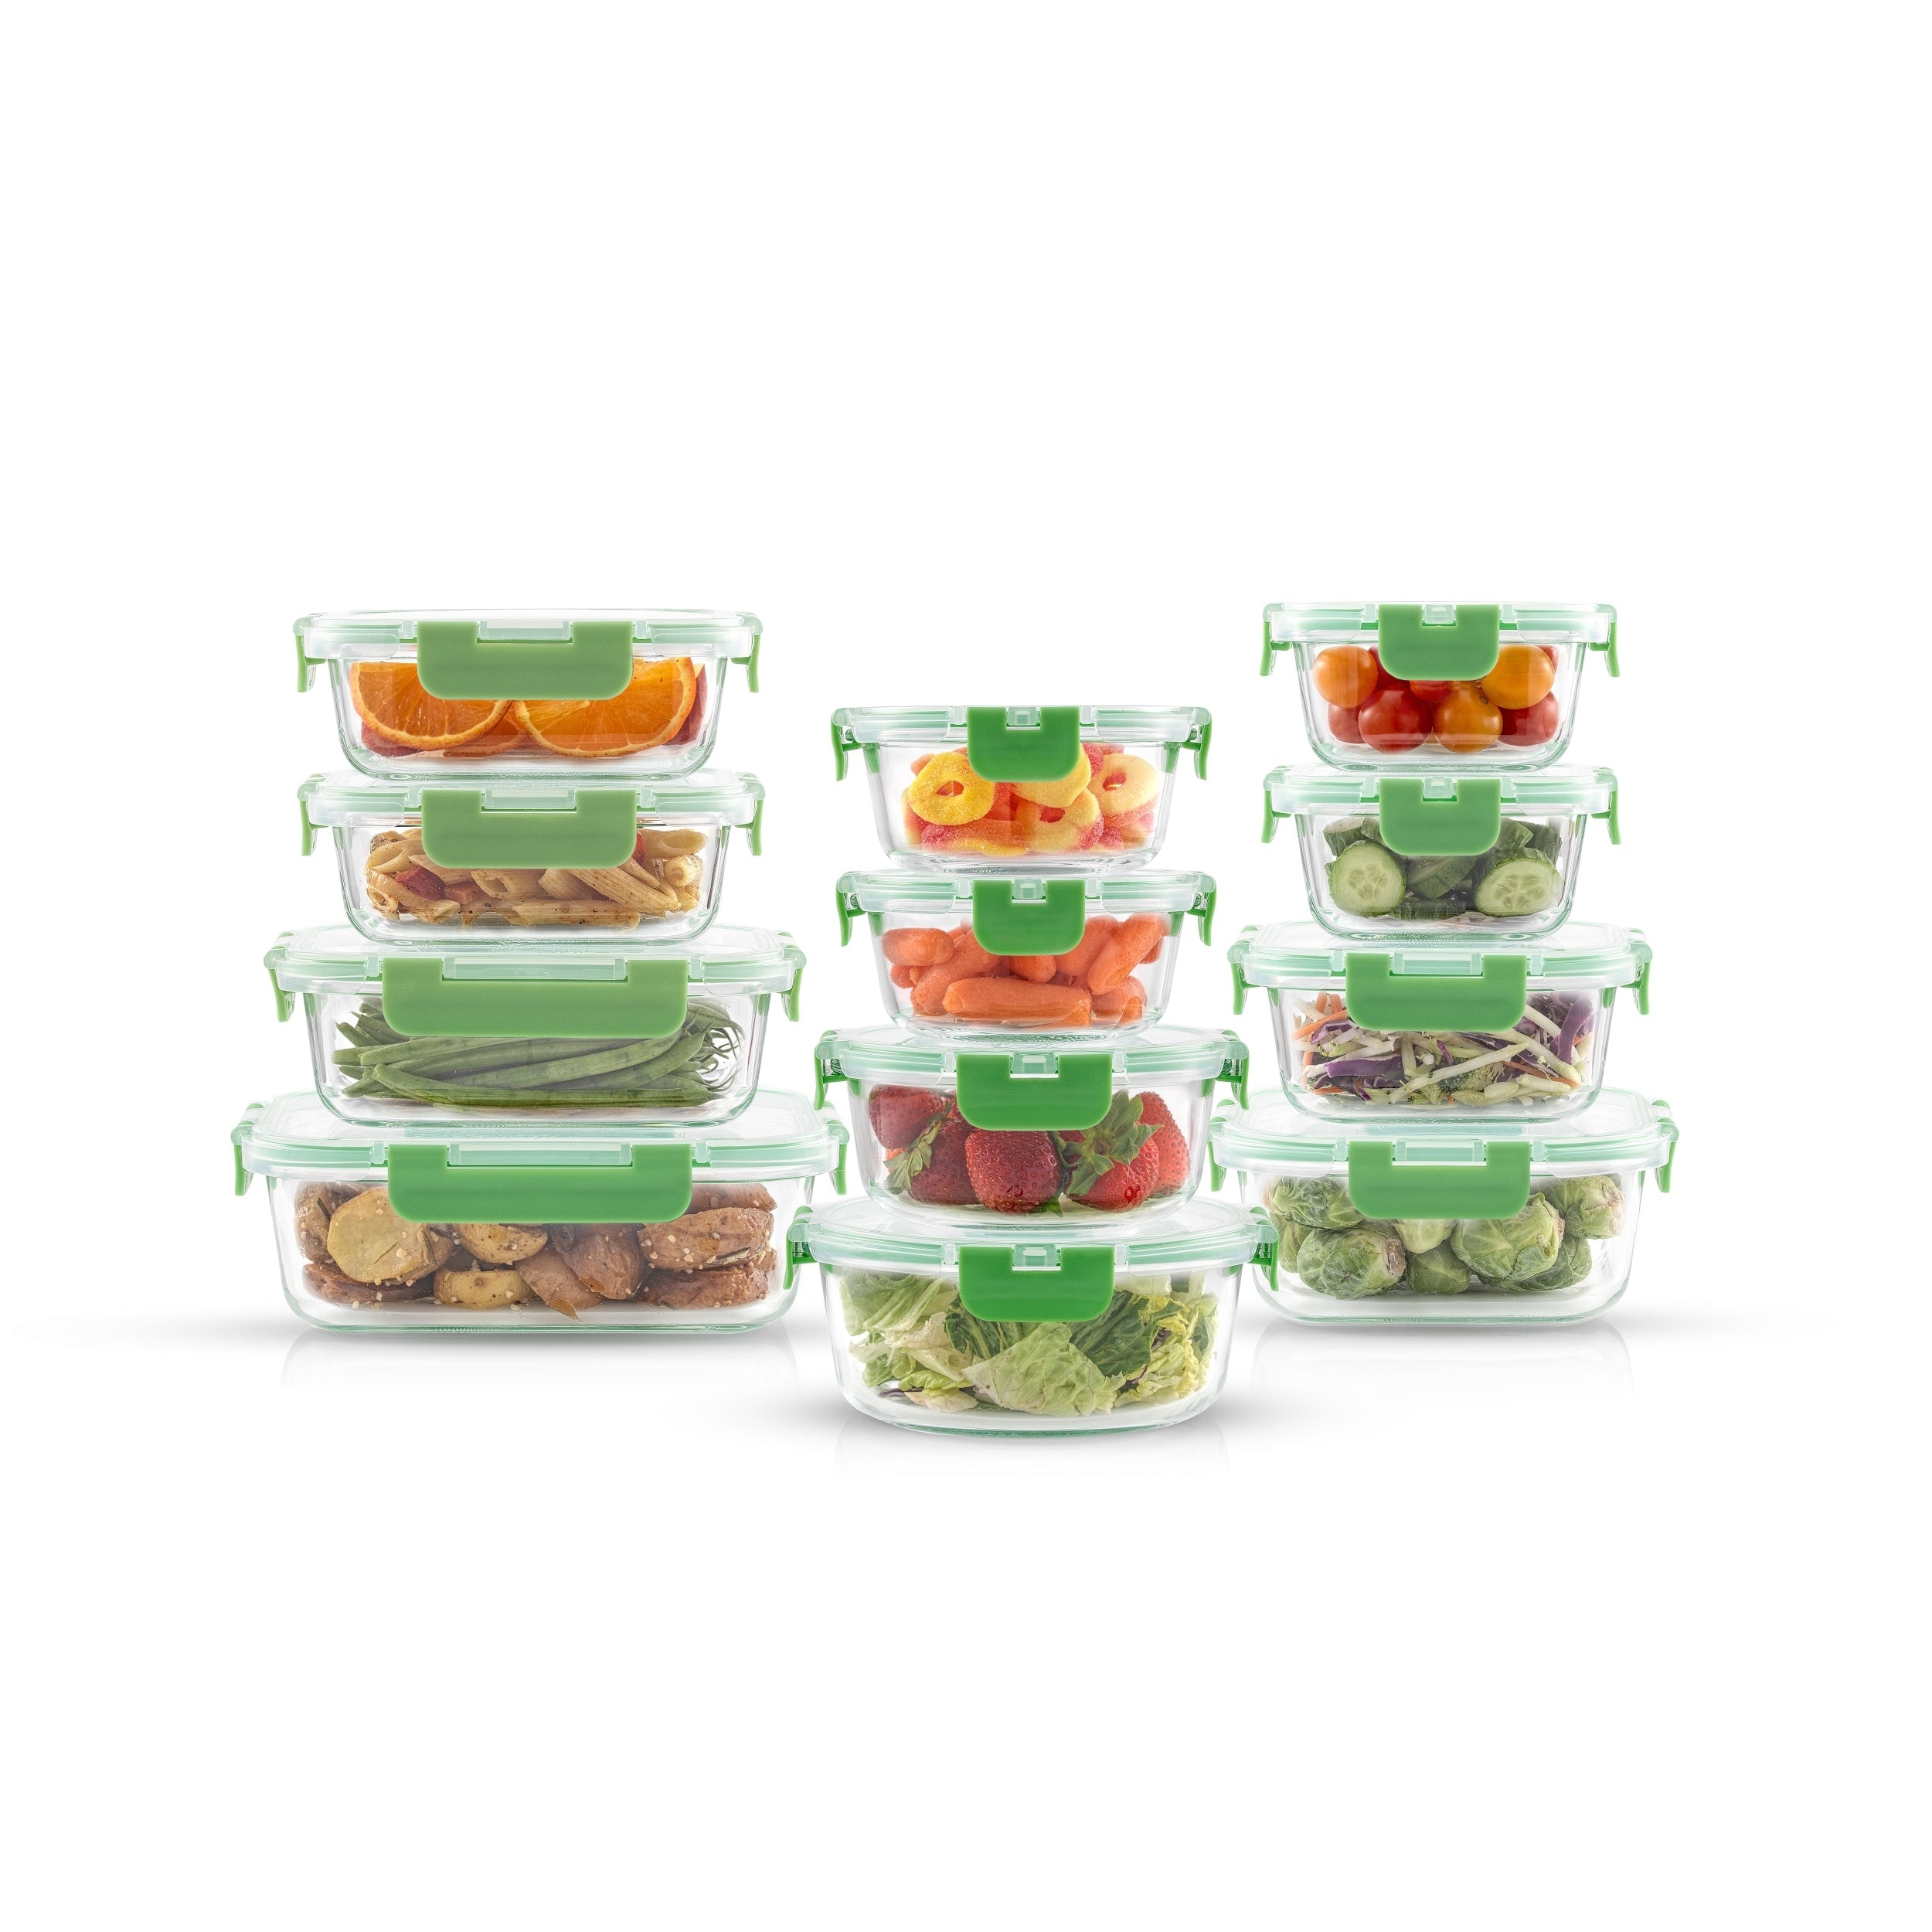 https://ak1.ostkcdn.com/images/products/is/images/direct/65309d8664ba0b3a60acd0dab91e95b05b209ce1/JoyFul-by-JoyJolt-24-Piece-Glass-Food-Storage-Containers-Set.jpg